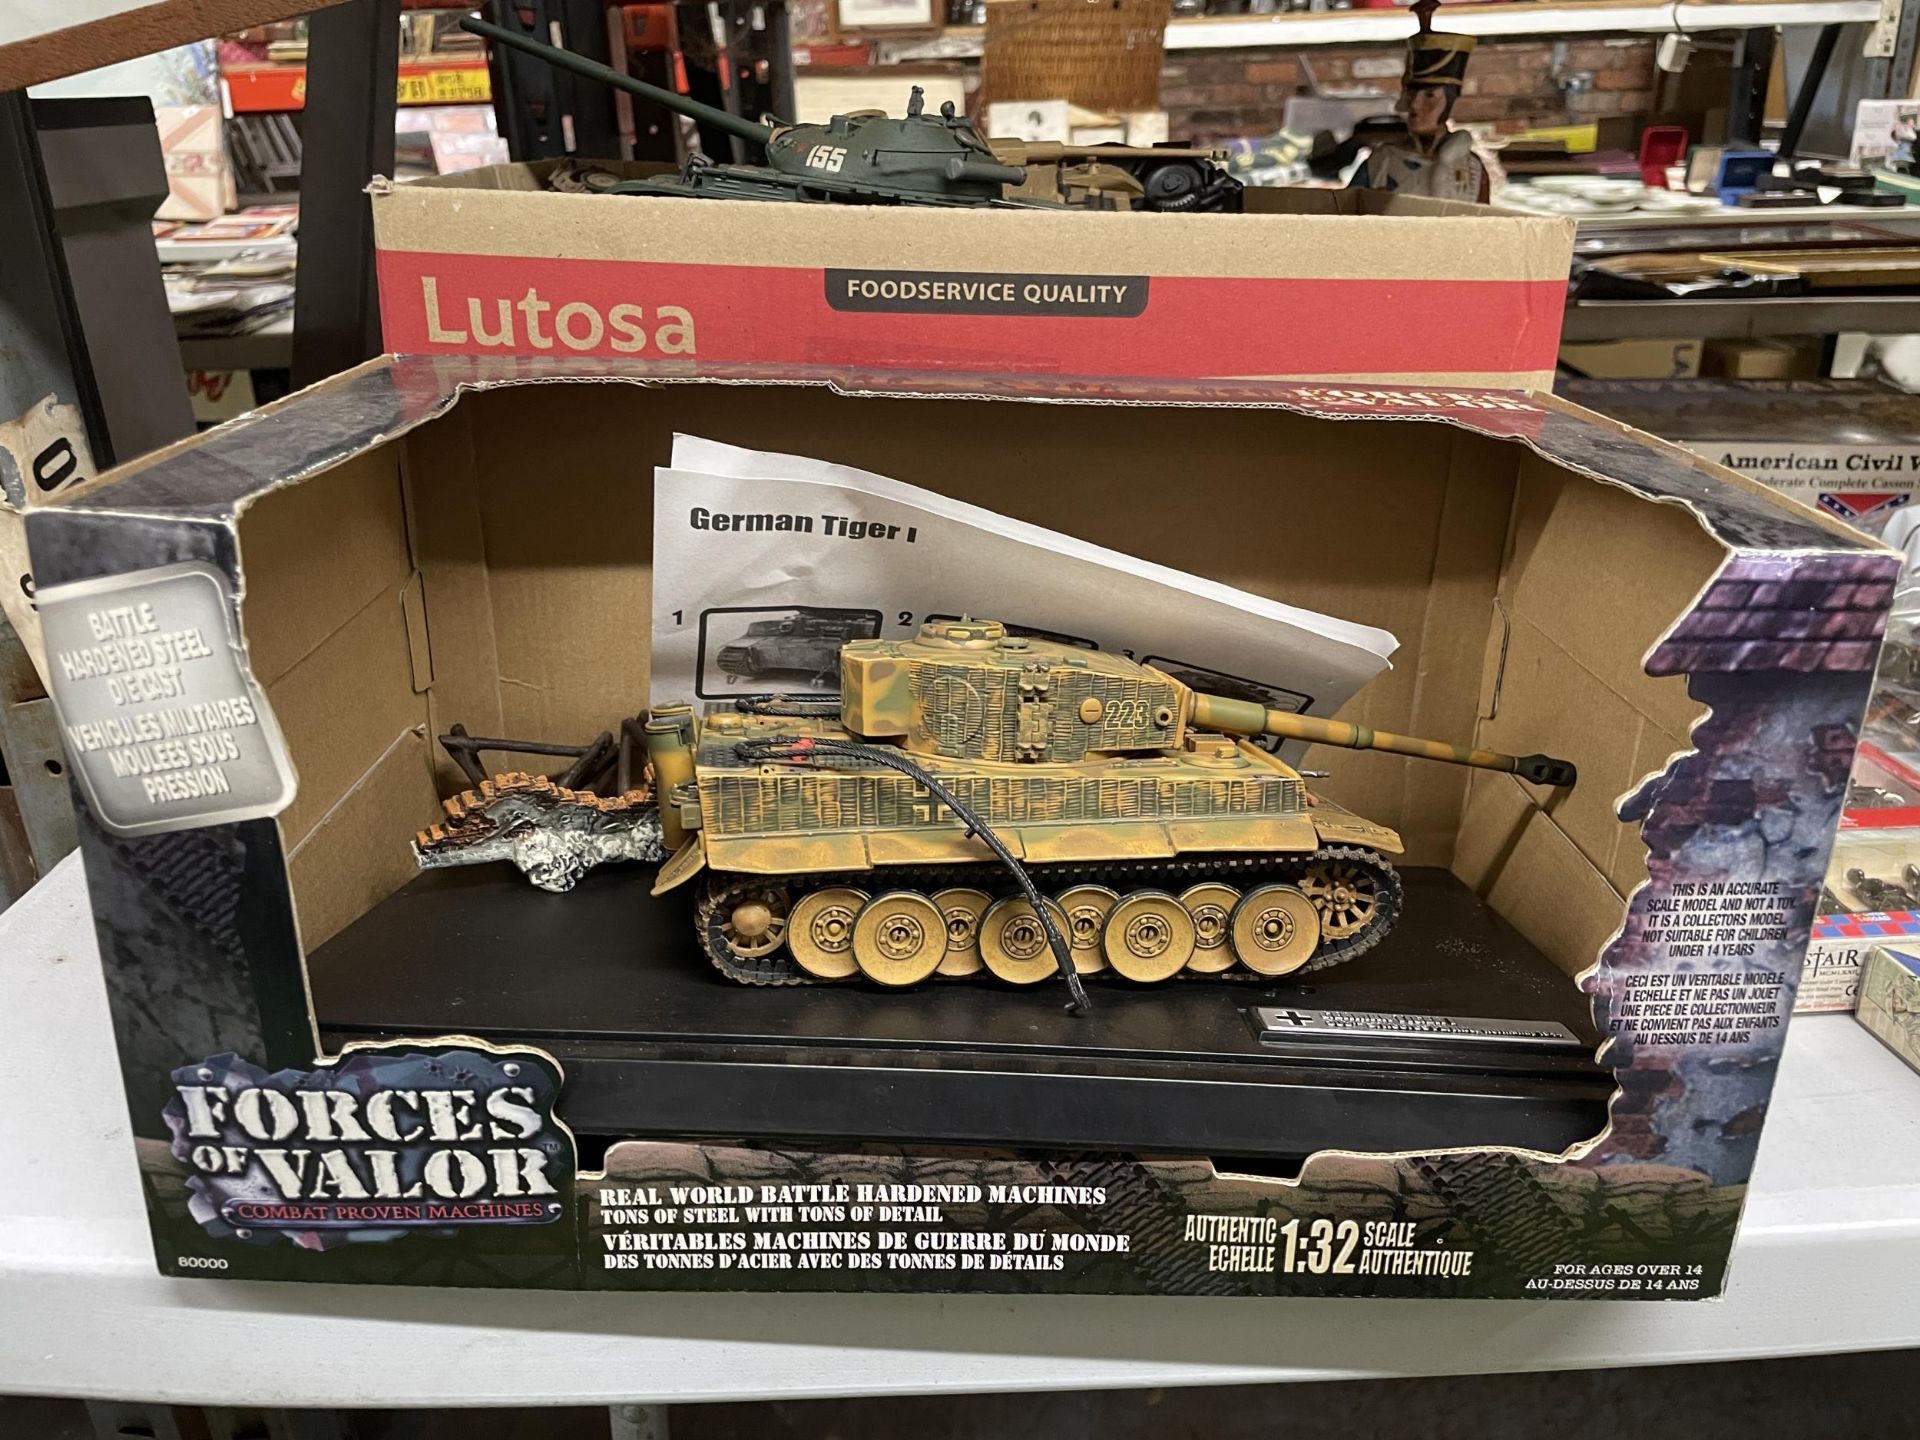 A LARGE QUANTITY OF TOY MILITARY TANKS PLUS A BOXED 'FORCES OF VALOR' GERMAN TIGER 1 TANK - Image 2 of 3